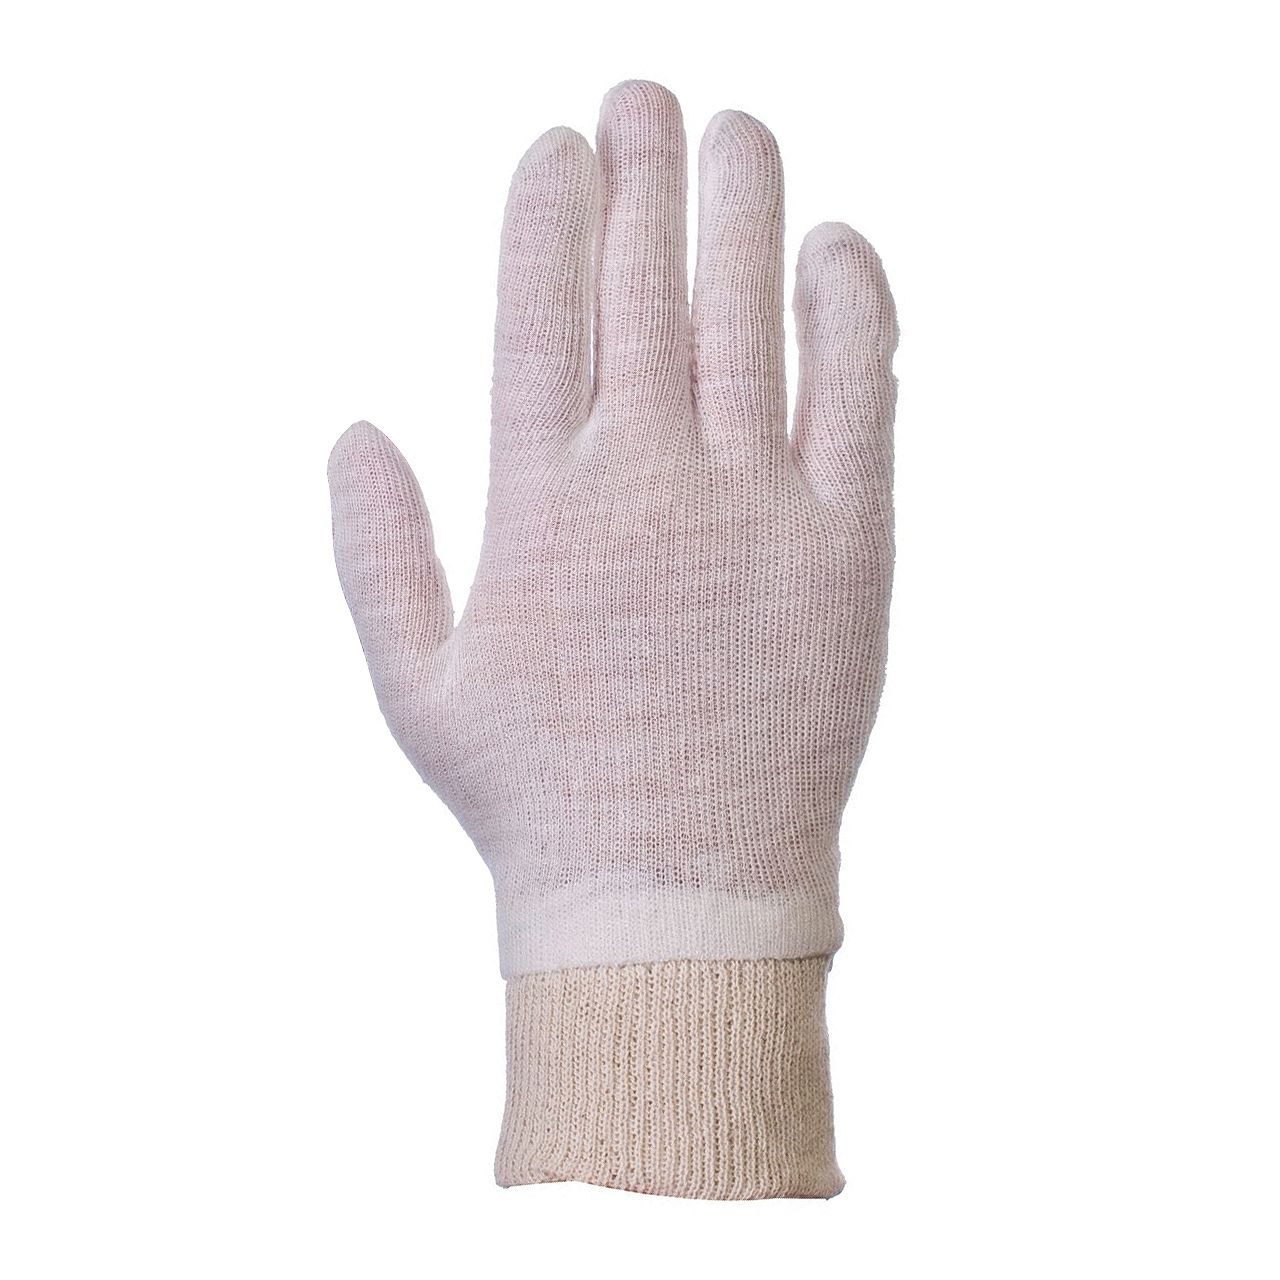 20 Pairs Supertouch 25002 Polycotton Lightweight Glove Liners 